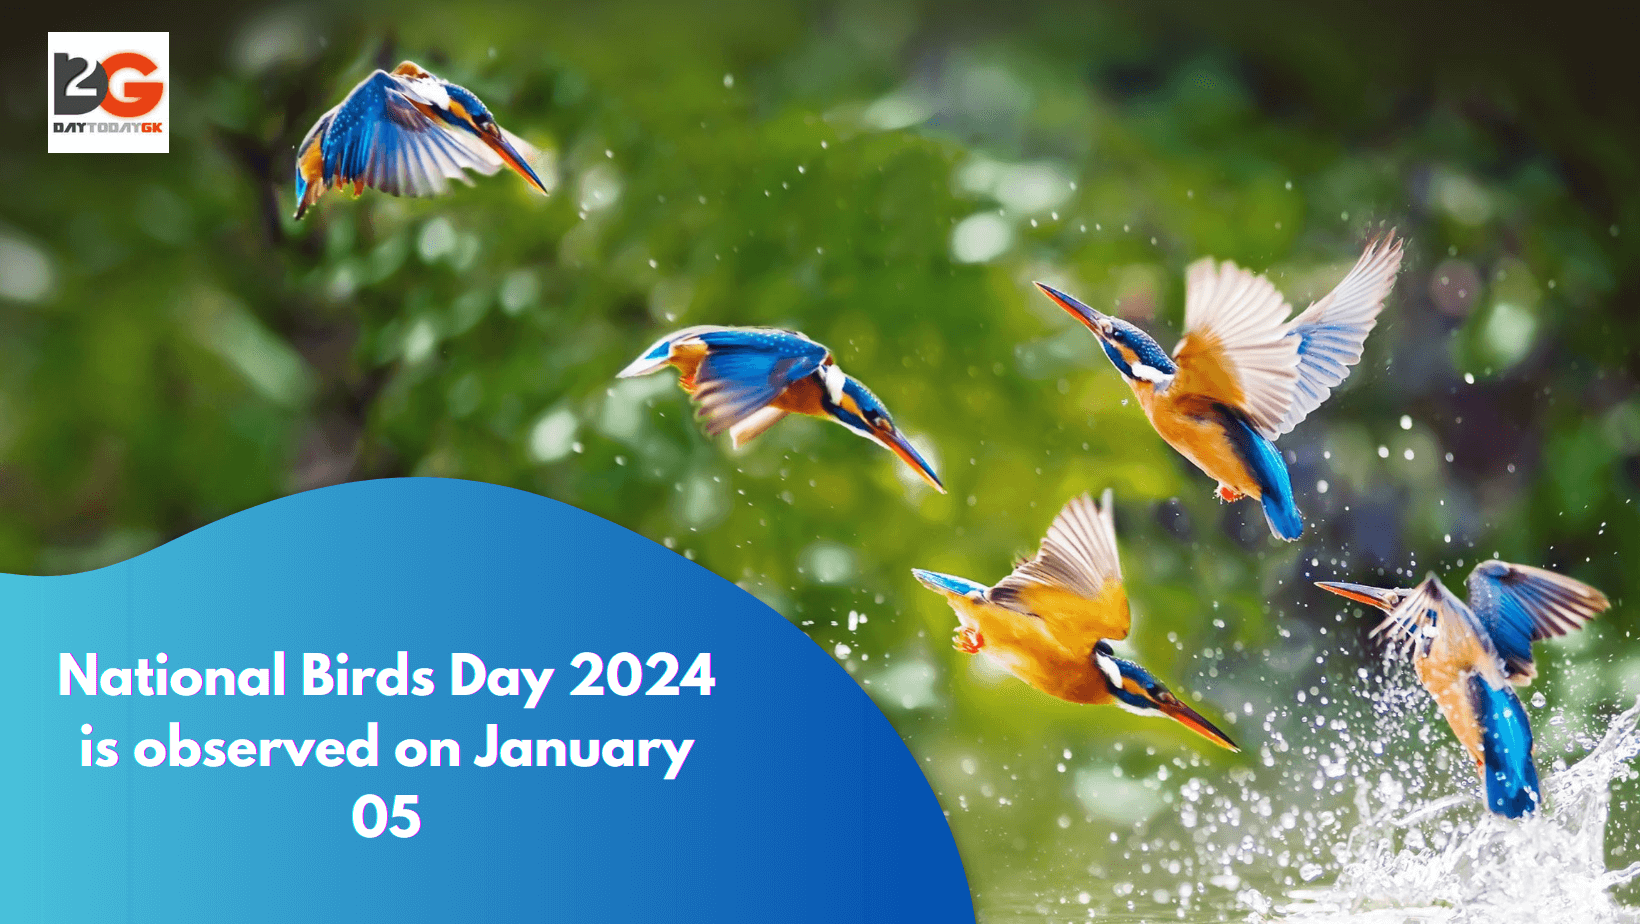 National Birds Day 2024 is observed on January 05